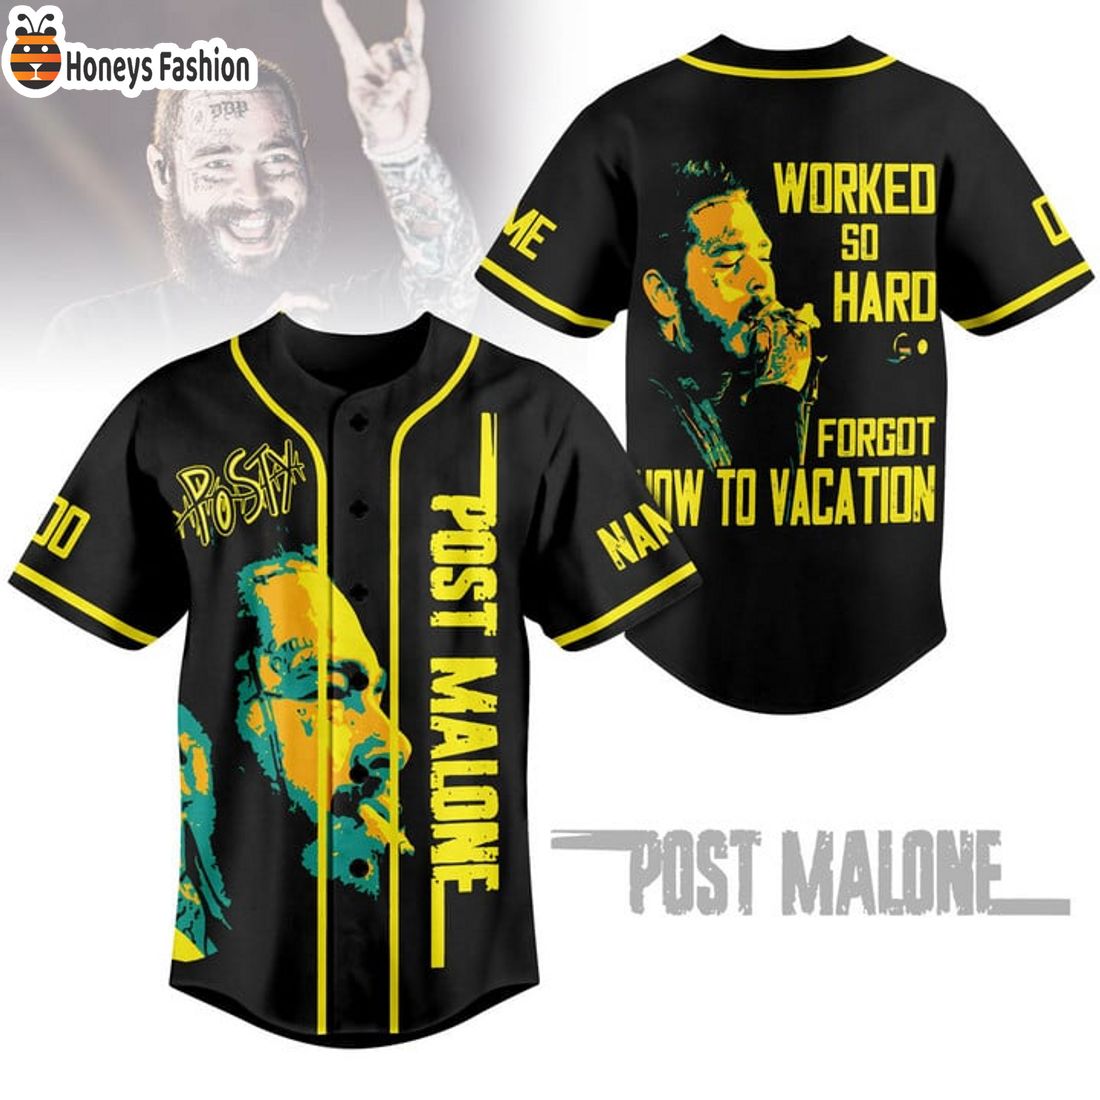 SELLER Post Malone Worked So Hard Forgot How To Vacation Baseball Jersey